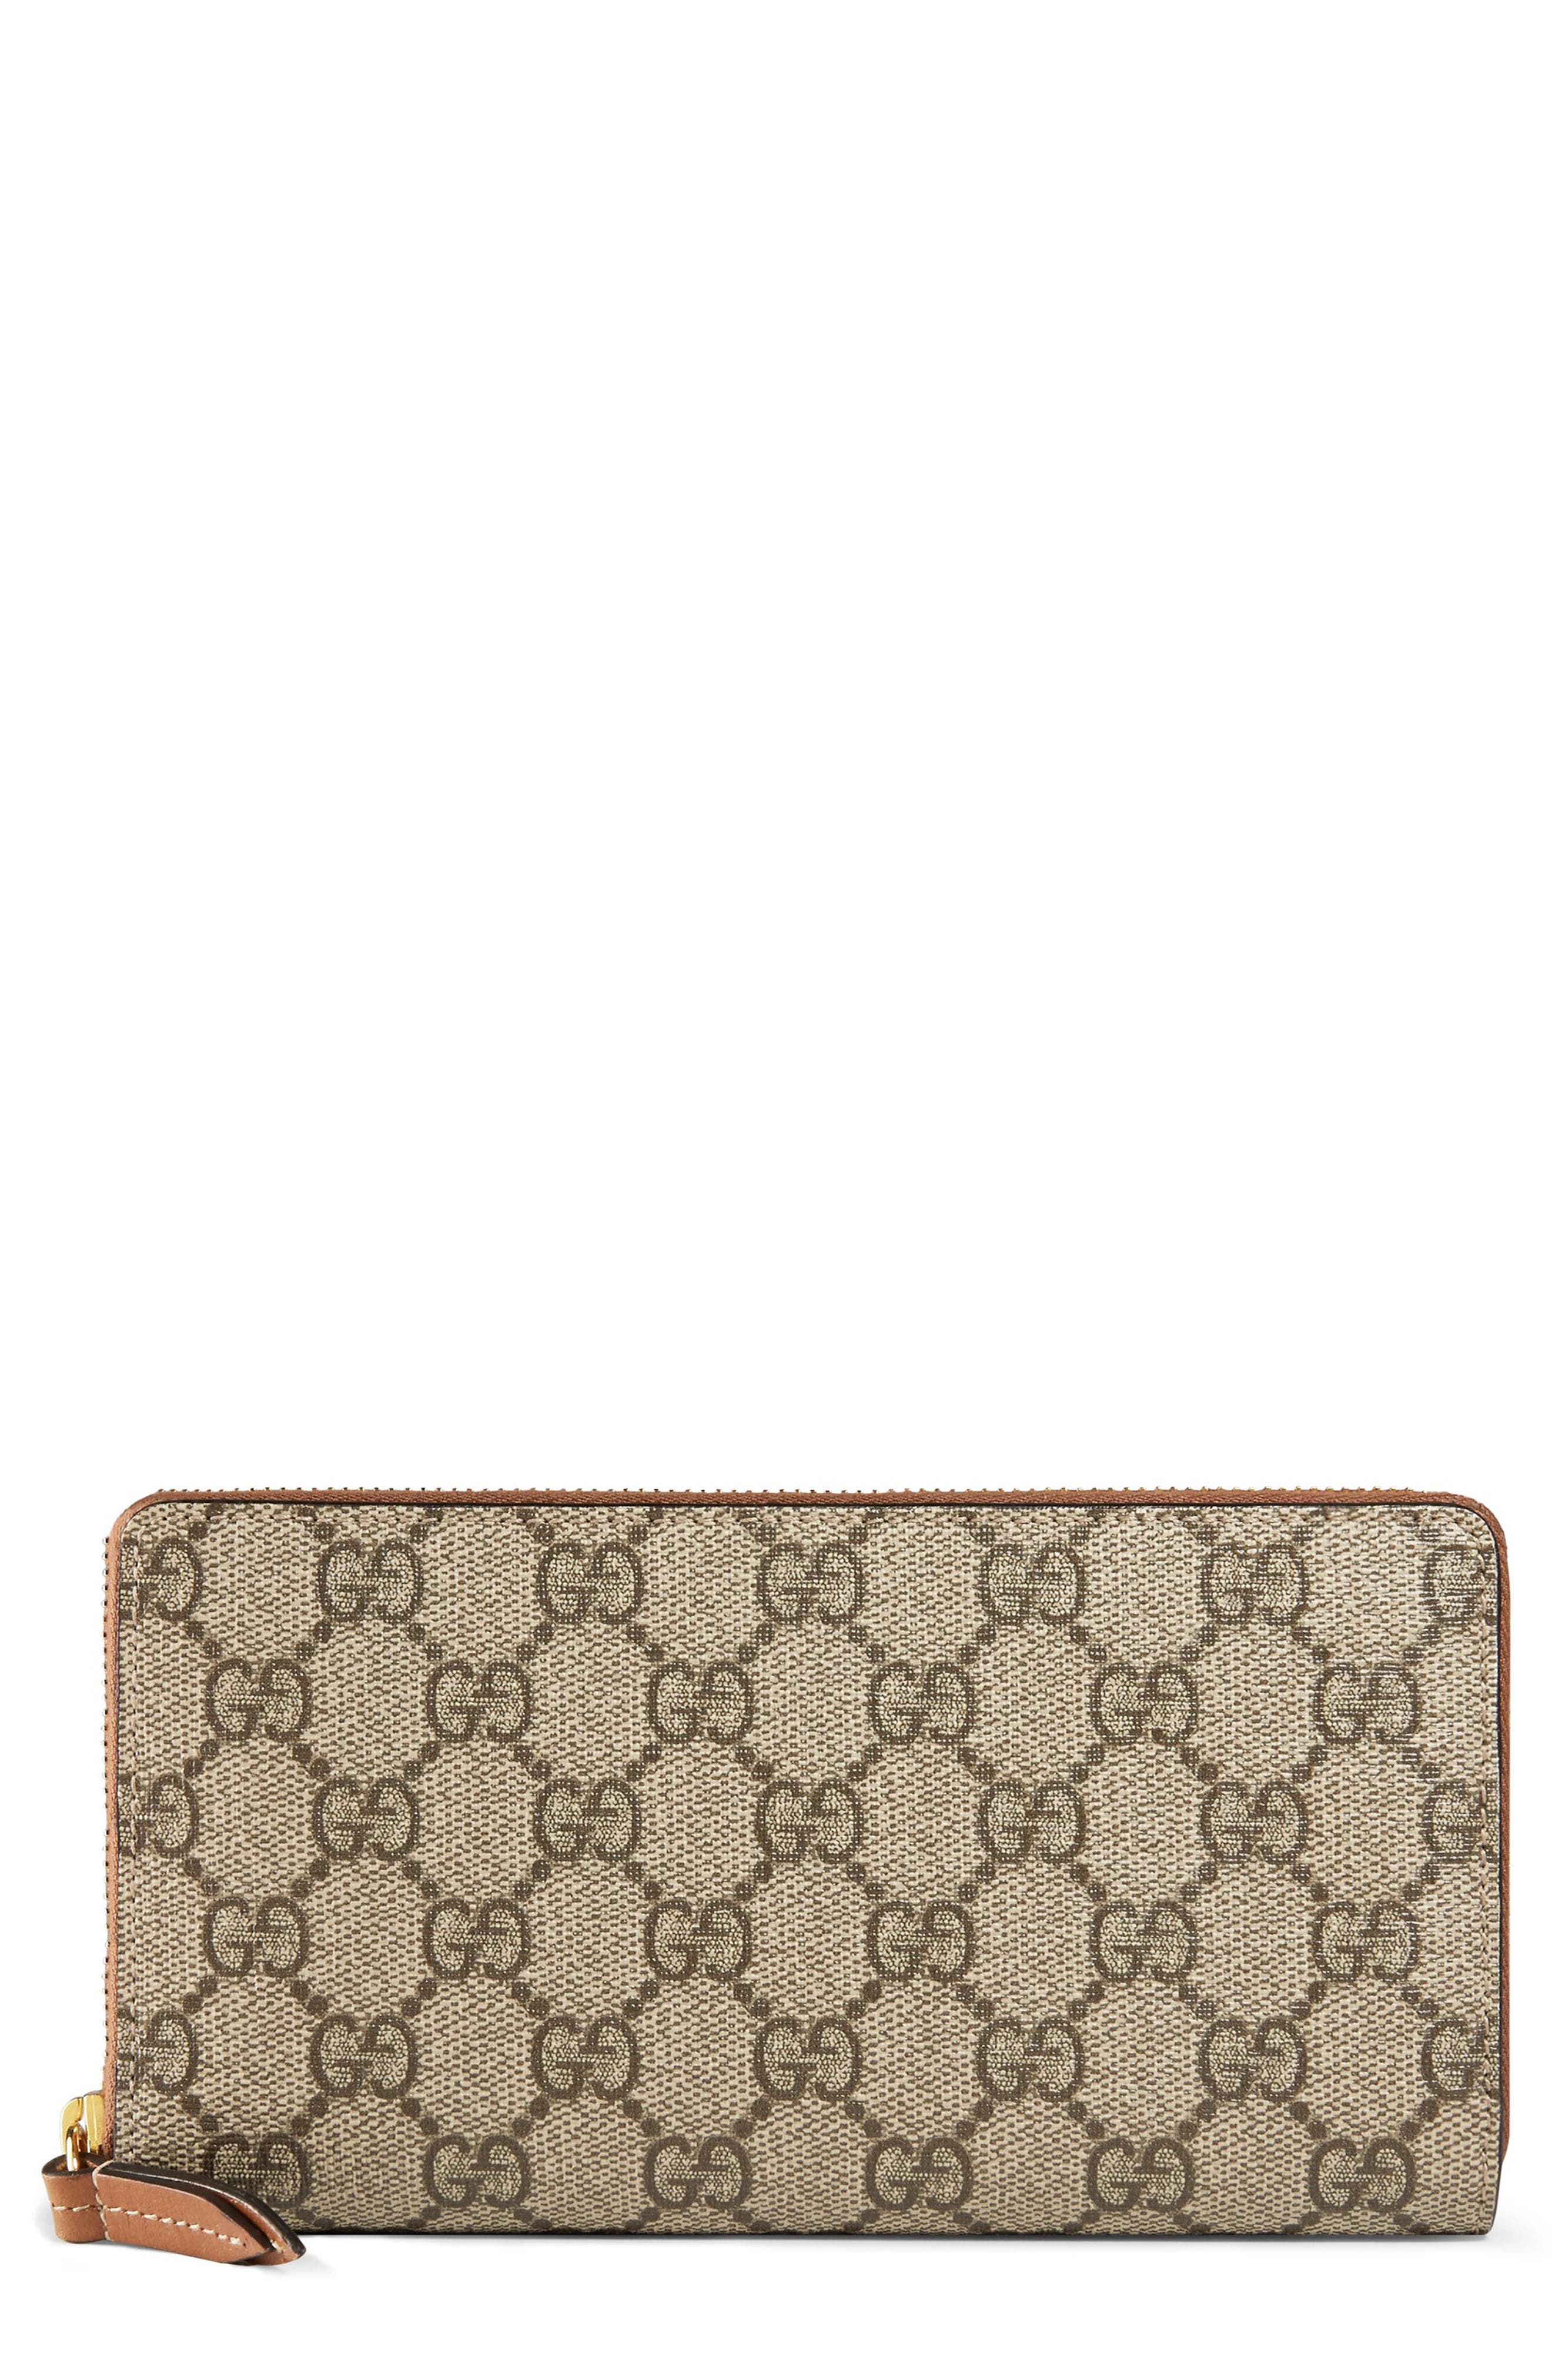 gucci small wallet price